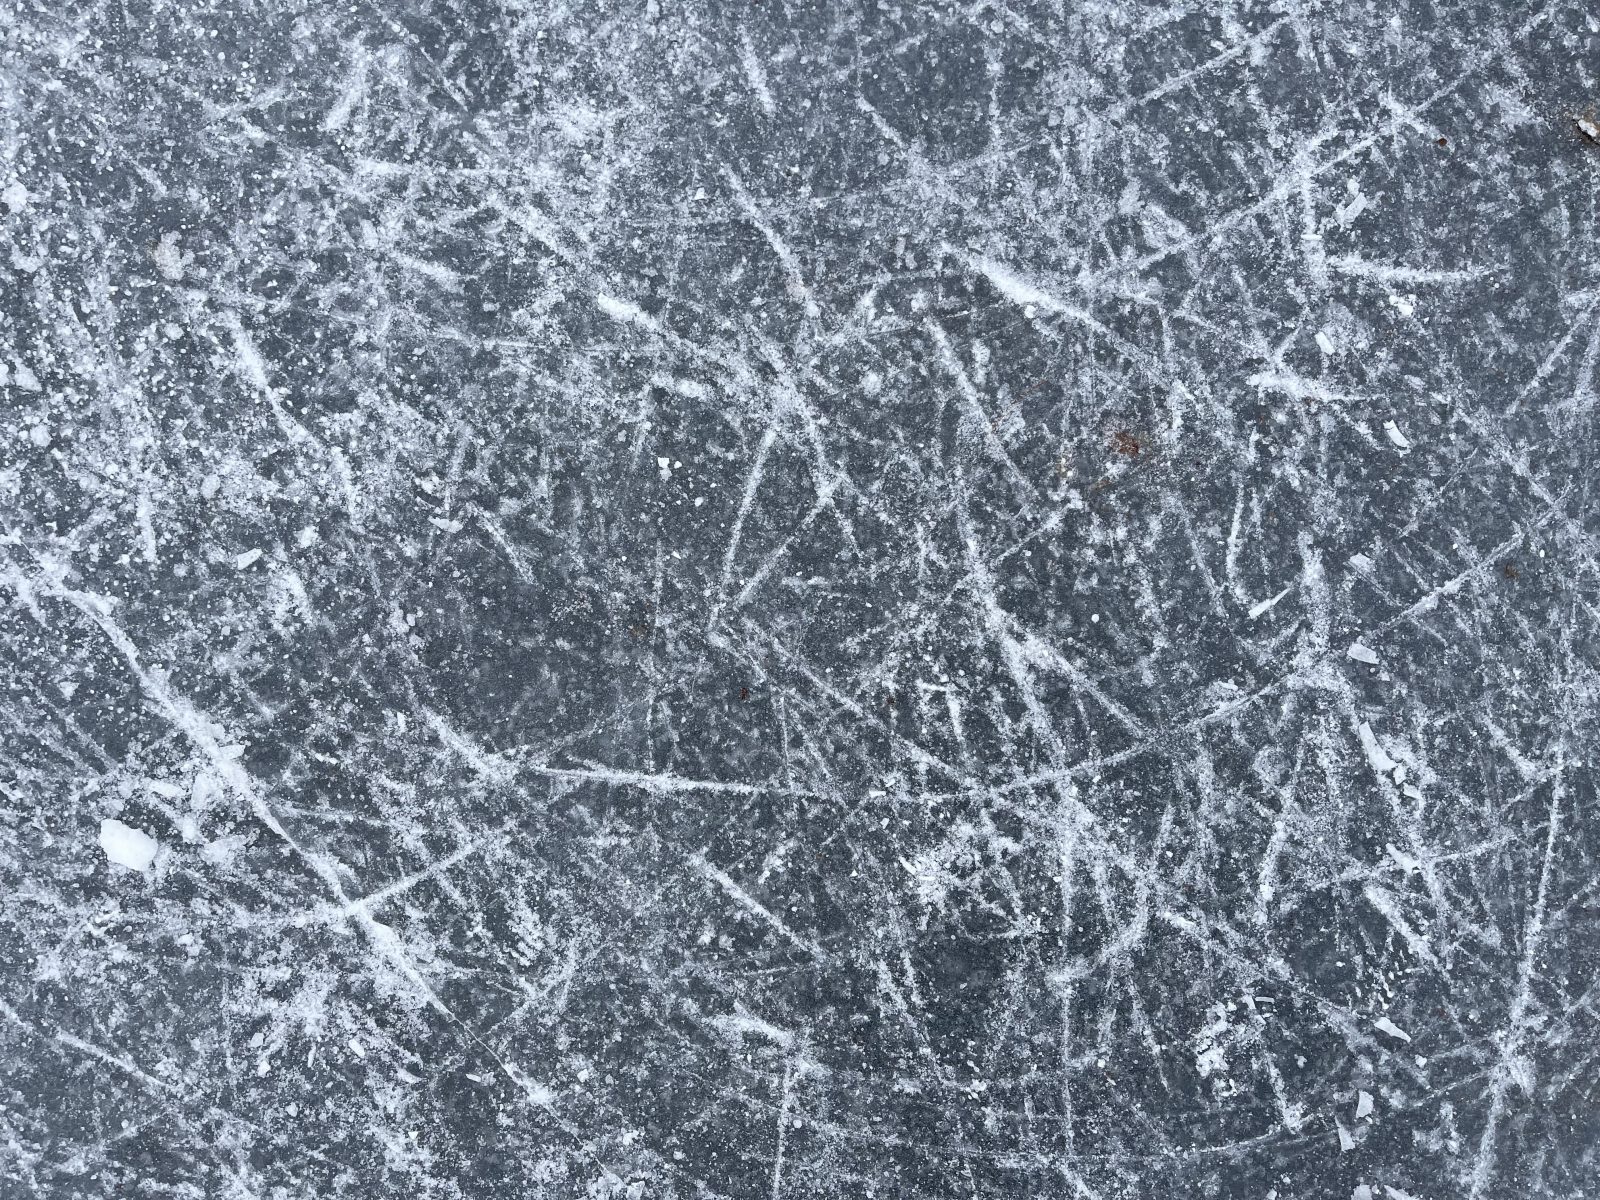 Scratches on the surface of ice on a pond